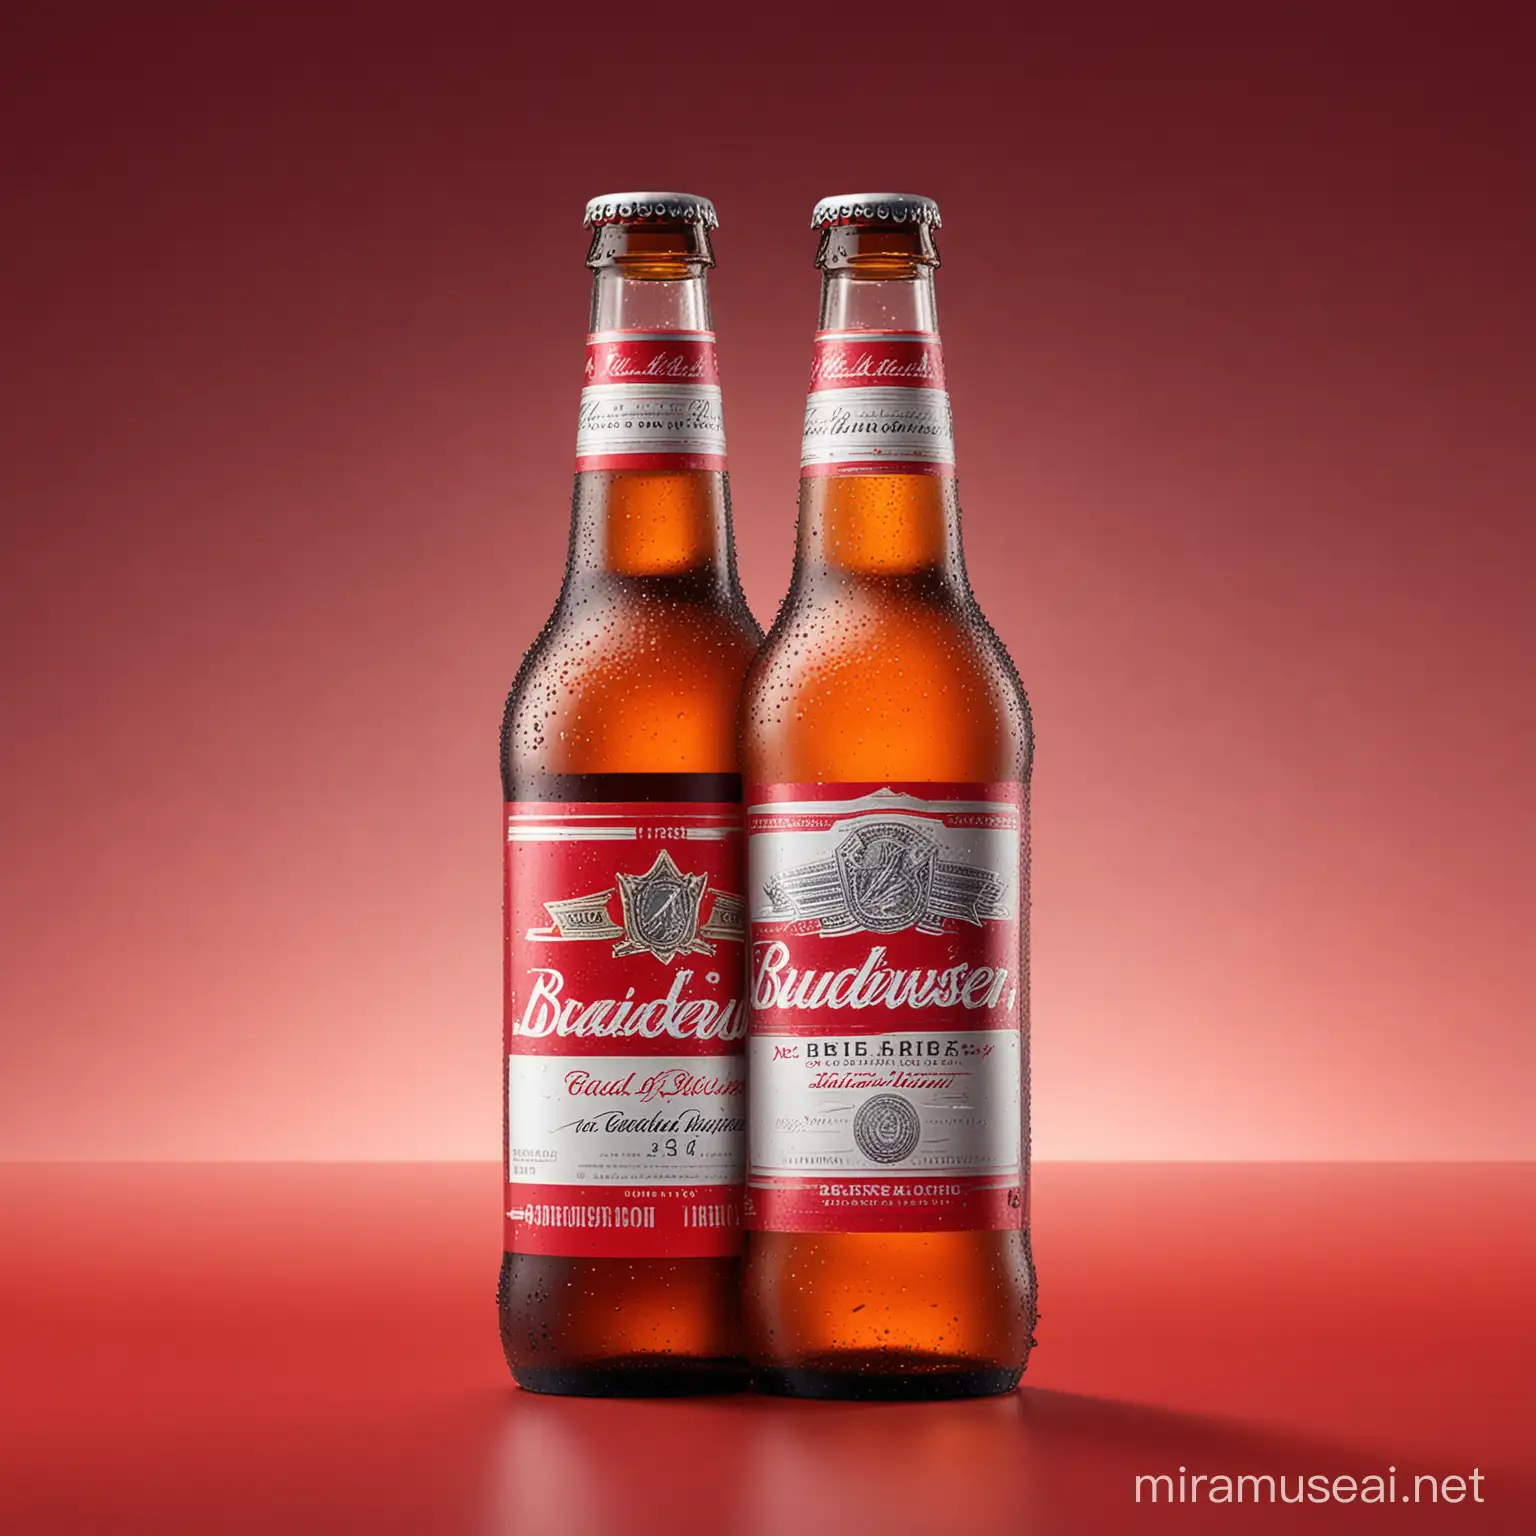 Create an image of one cold bottle of budweiser.
Background is a subtle and progressive red gradient.